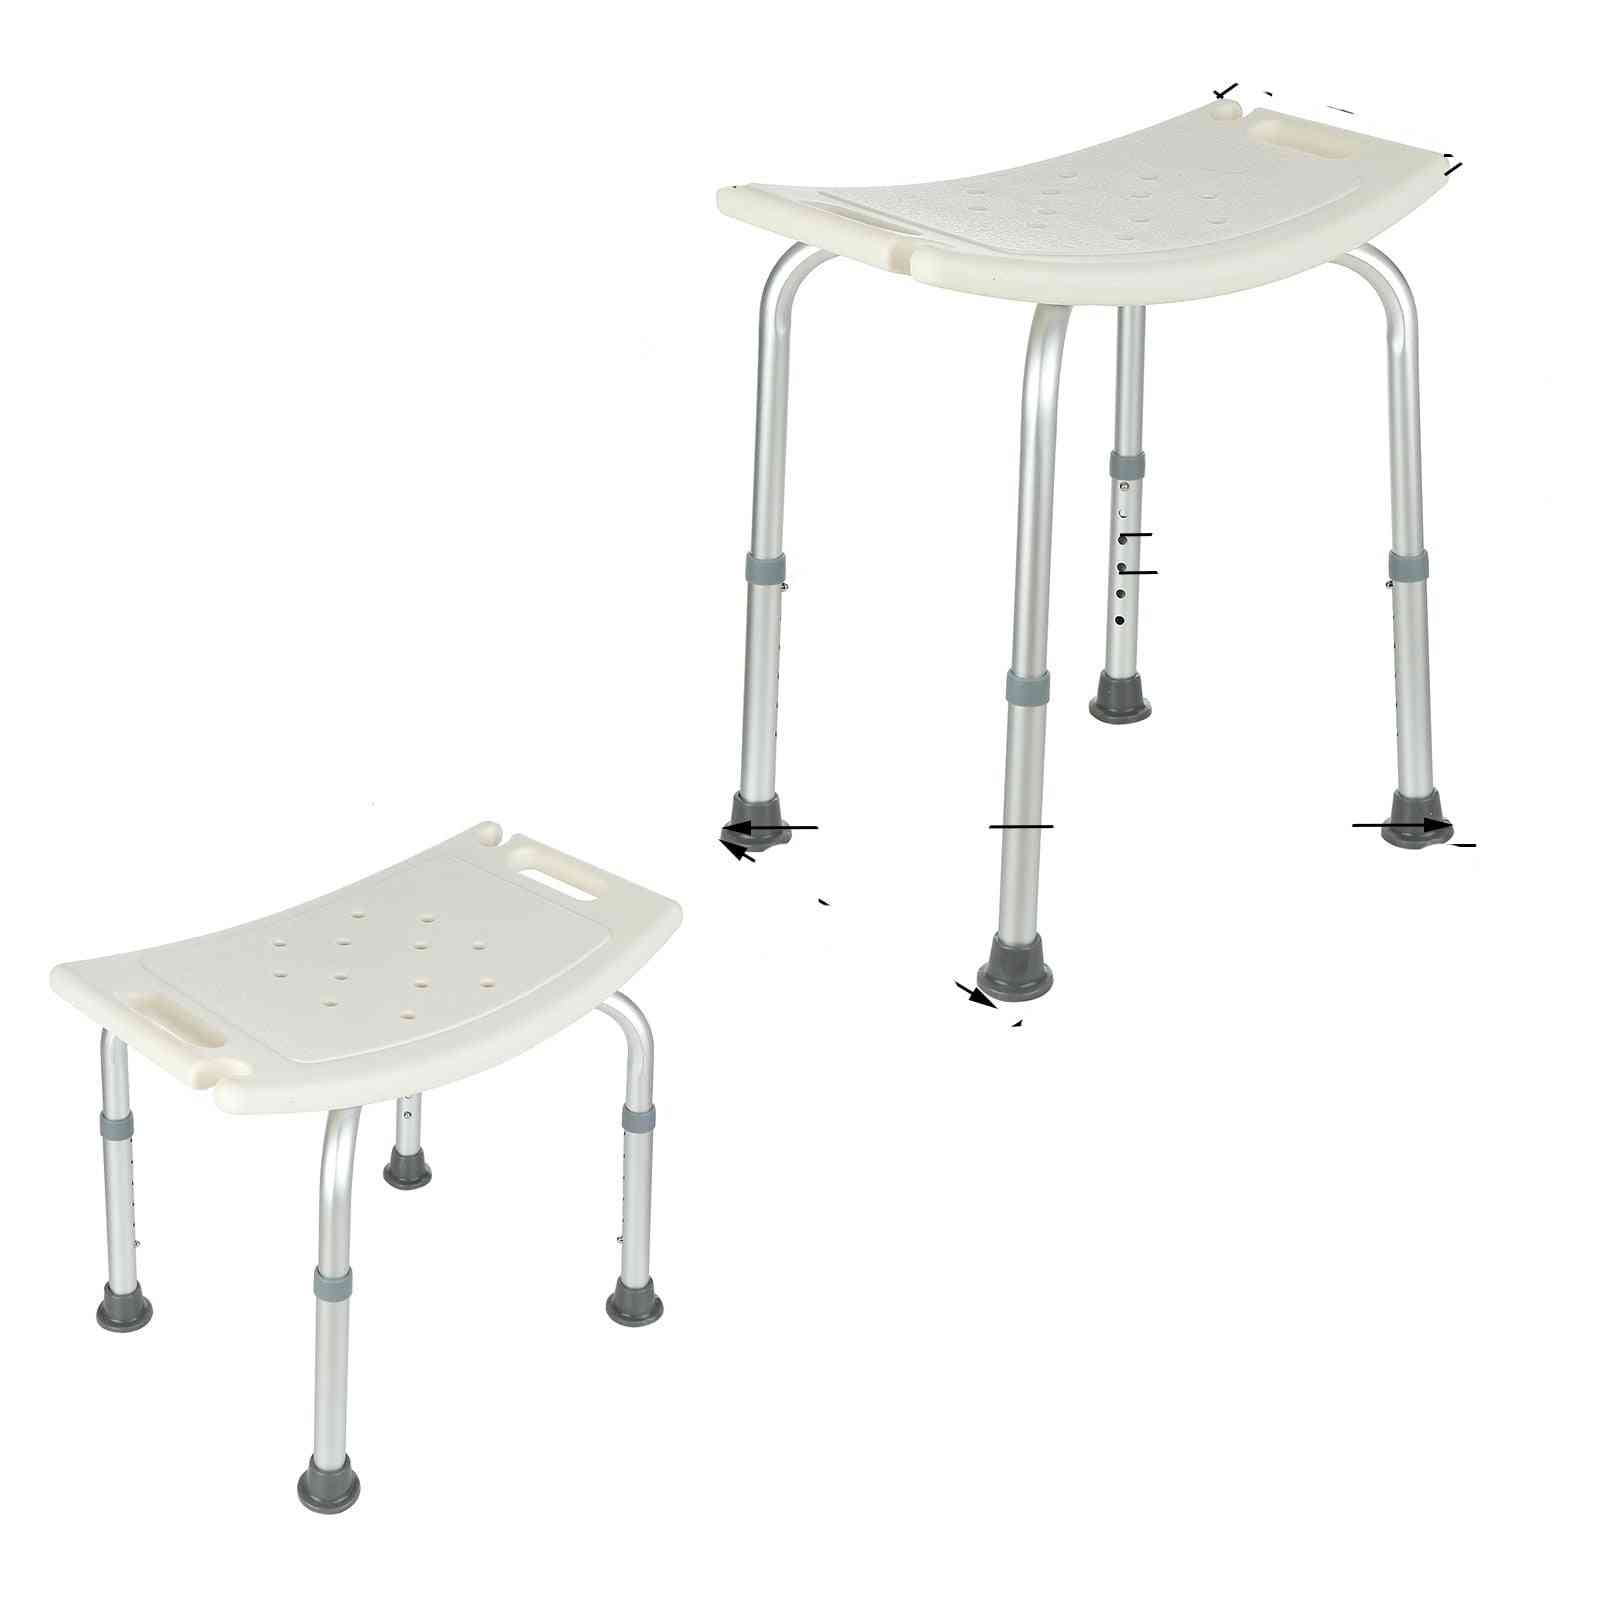 7 Gears Height Bathroom And Shower Chair Adjustable Bench Stool Seat